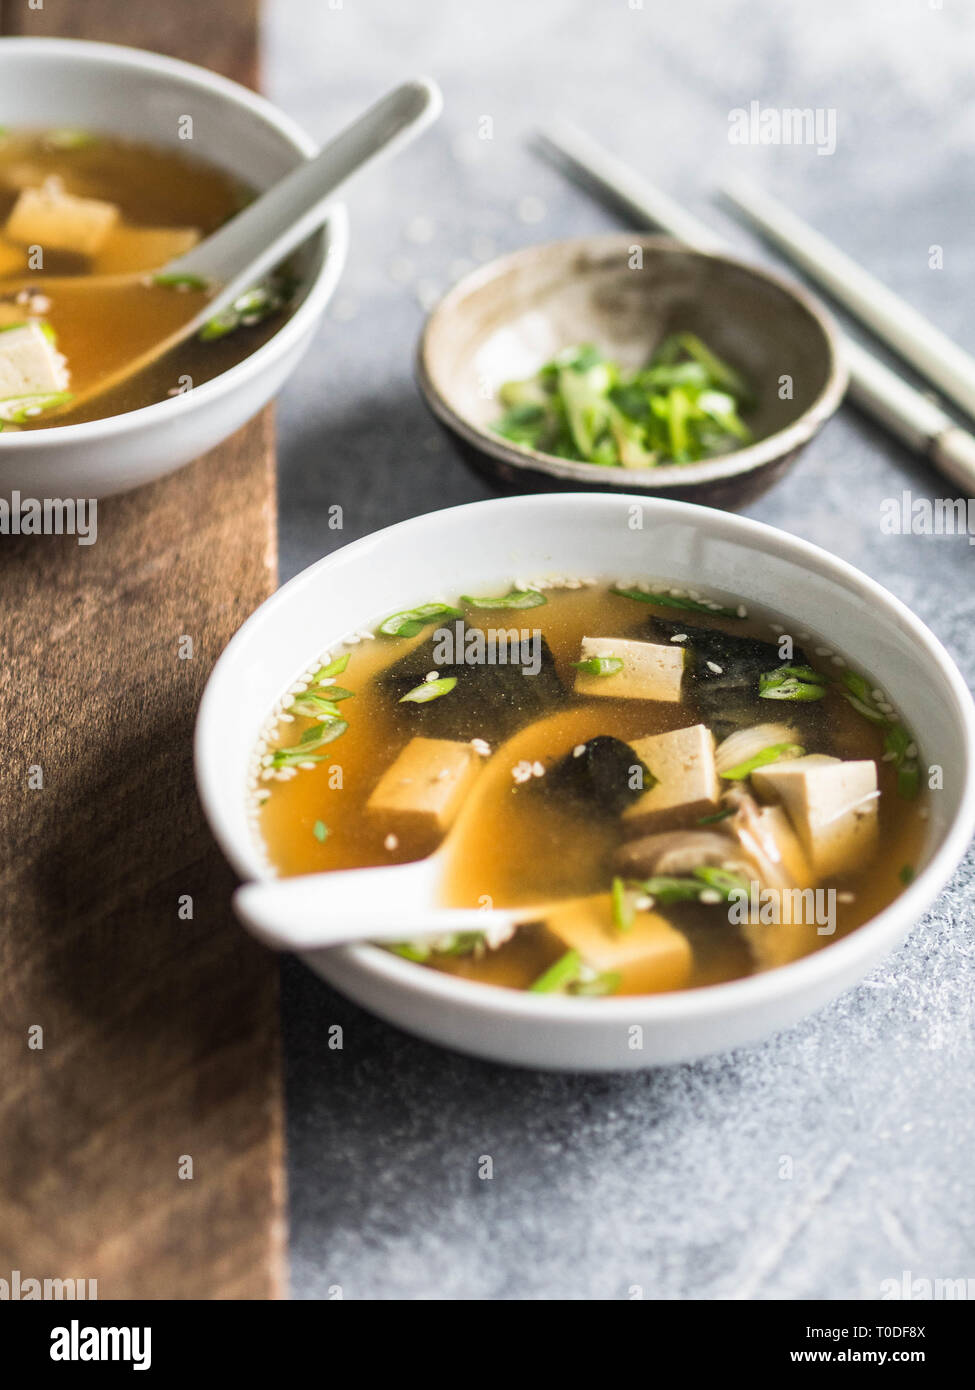 Japanese miso soup with oyster mushrooms in a bowls with a spoon and white chopsticks on a grey and wood backgrounds. Stock Photo